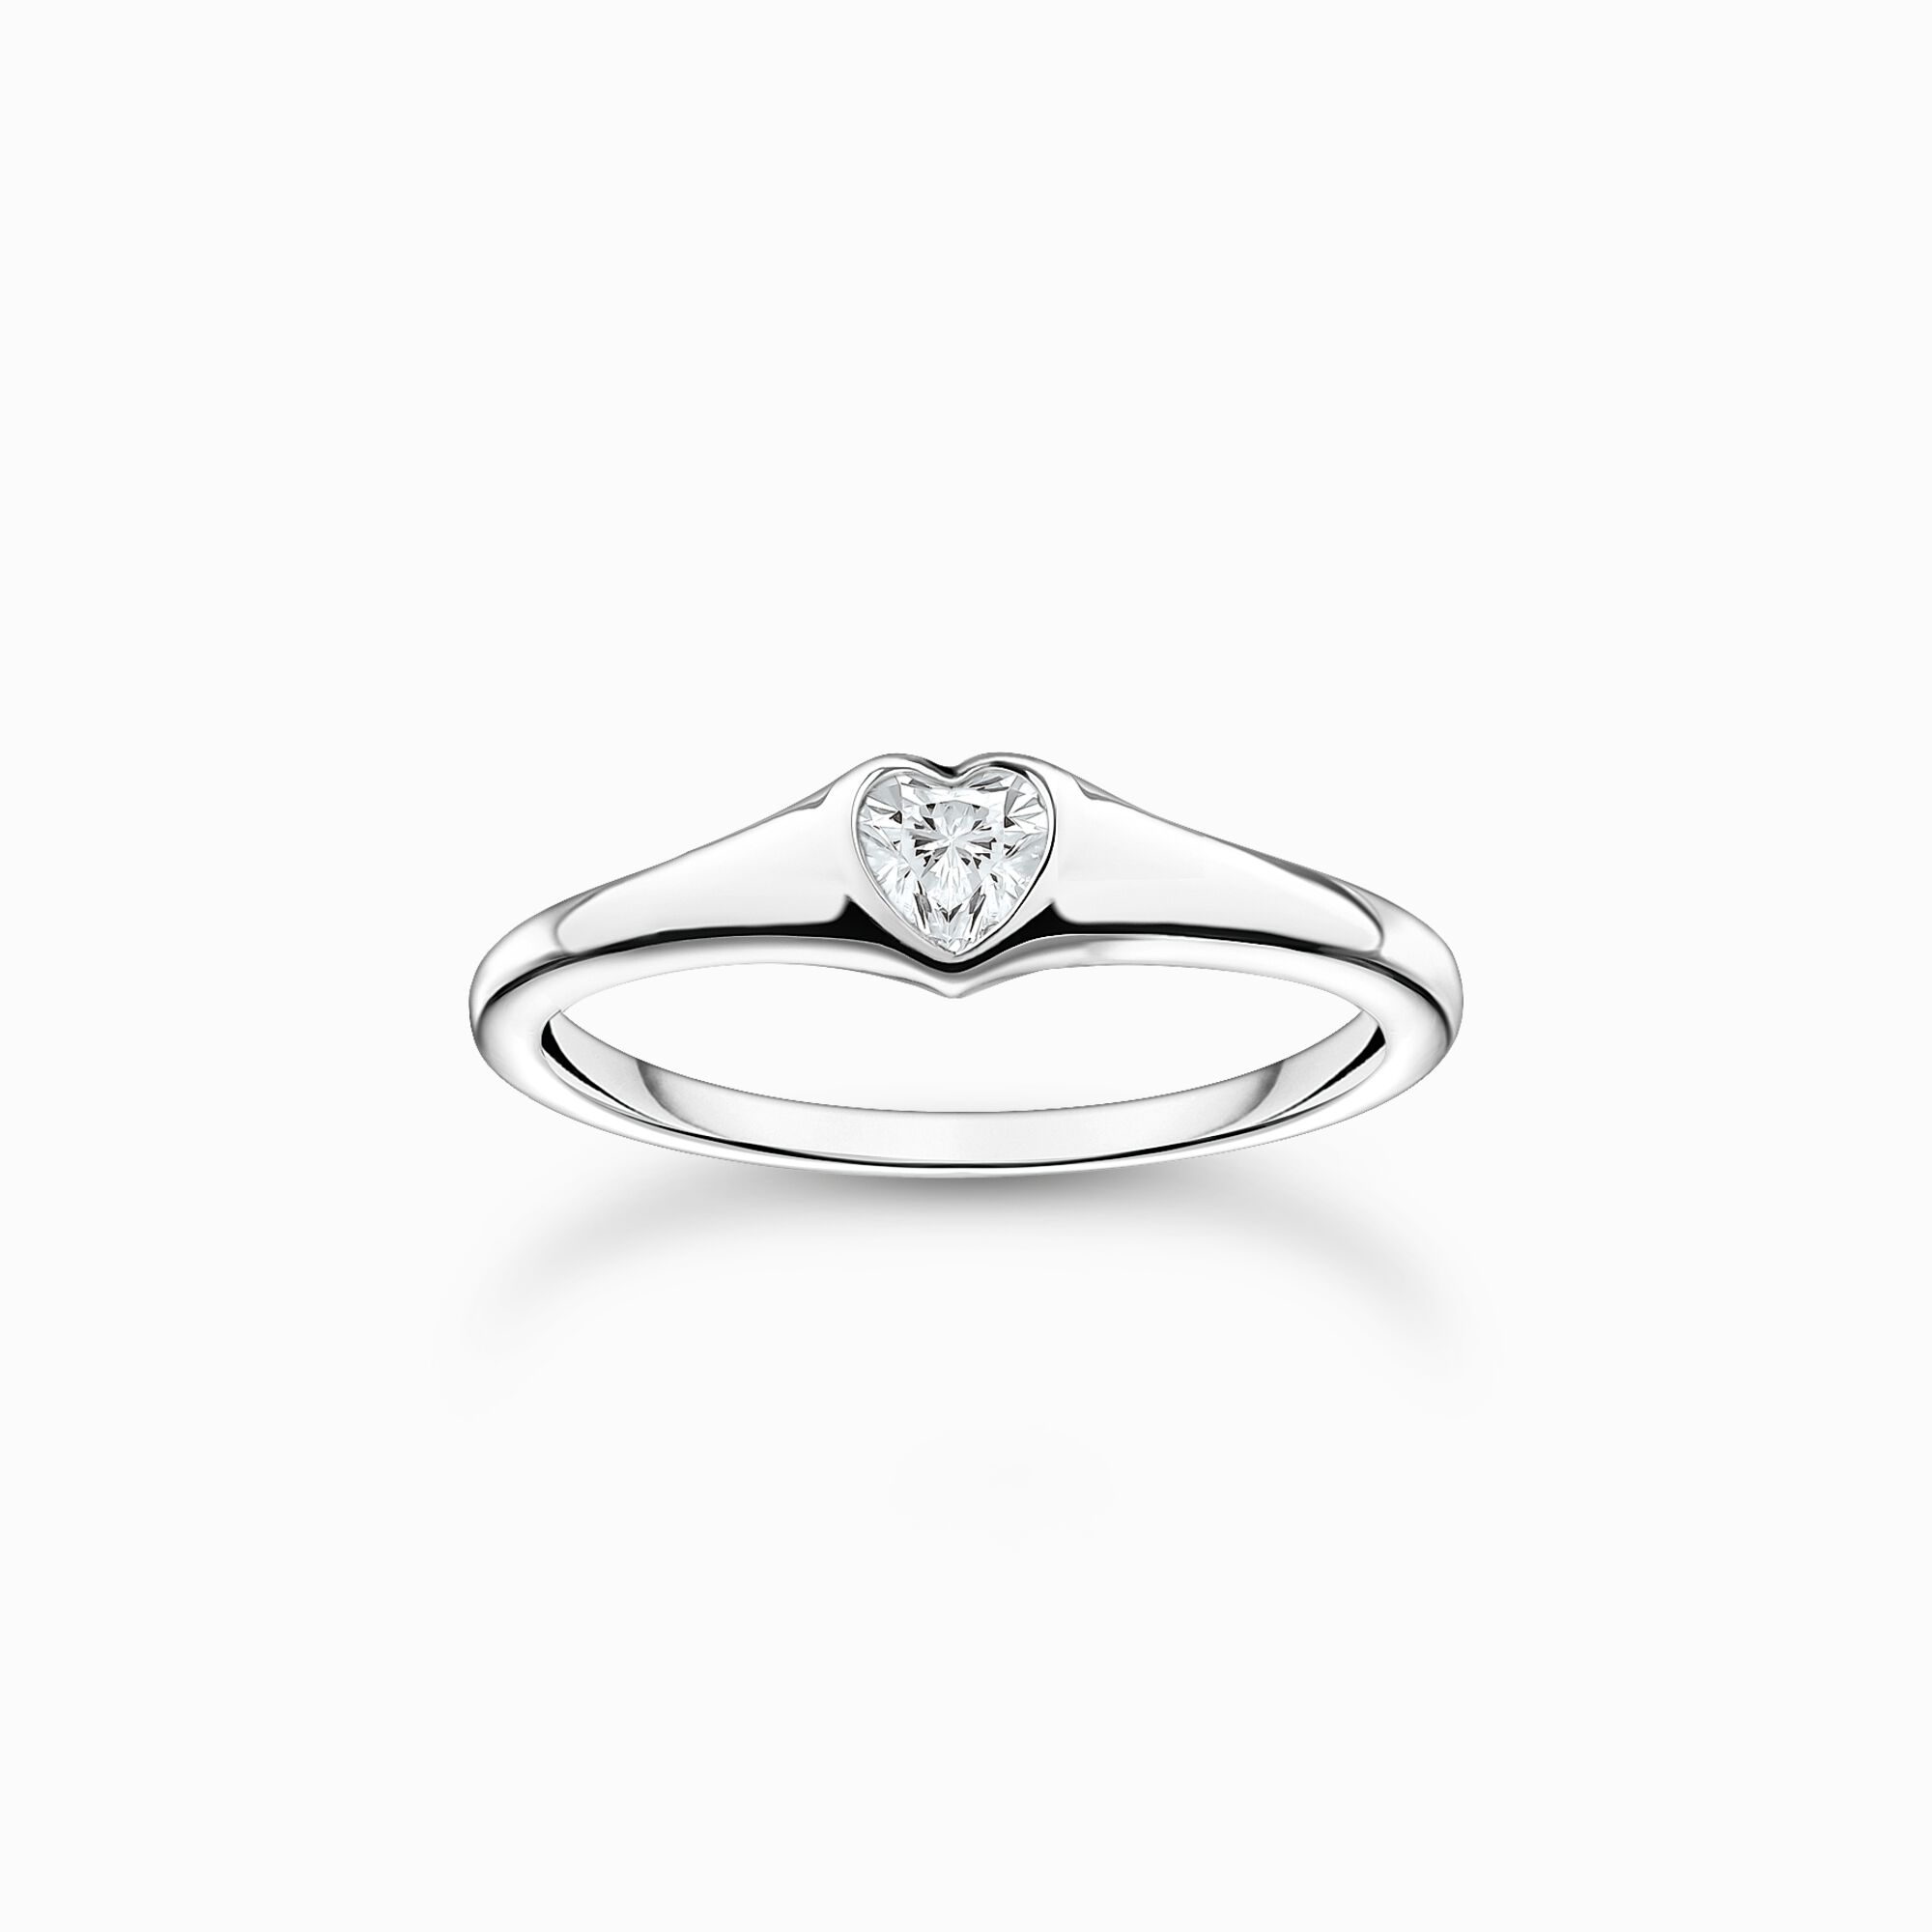 Ring heart silver from the Charming Collection collection in the THOMAS SABO online store